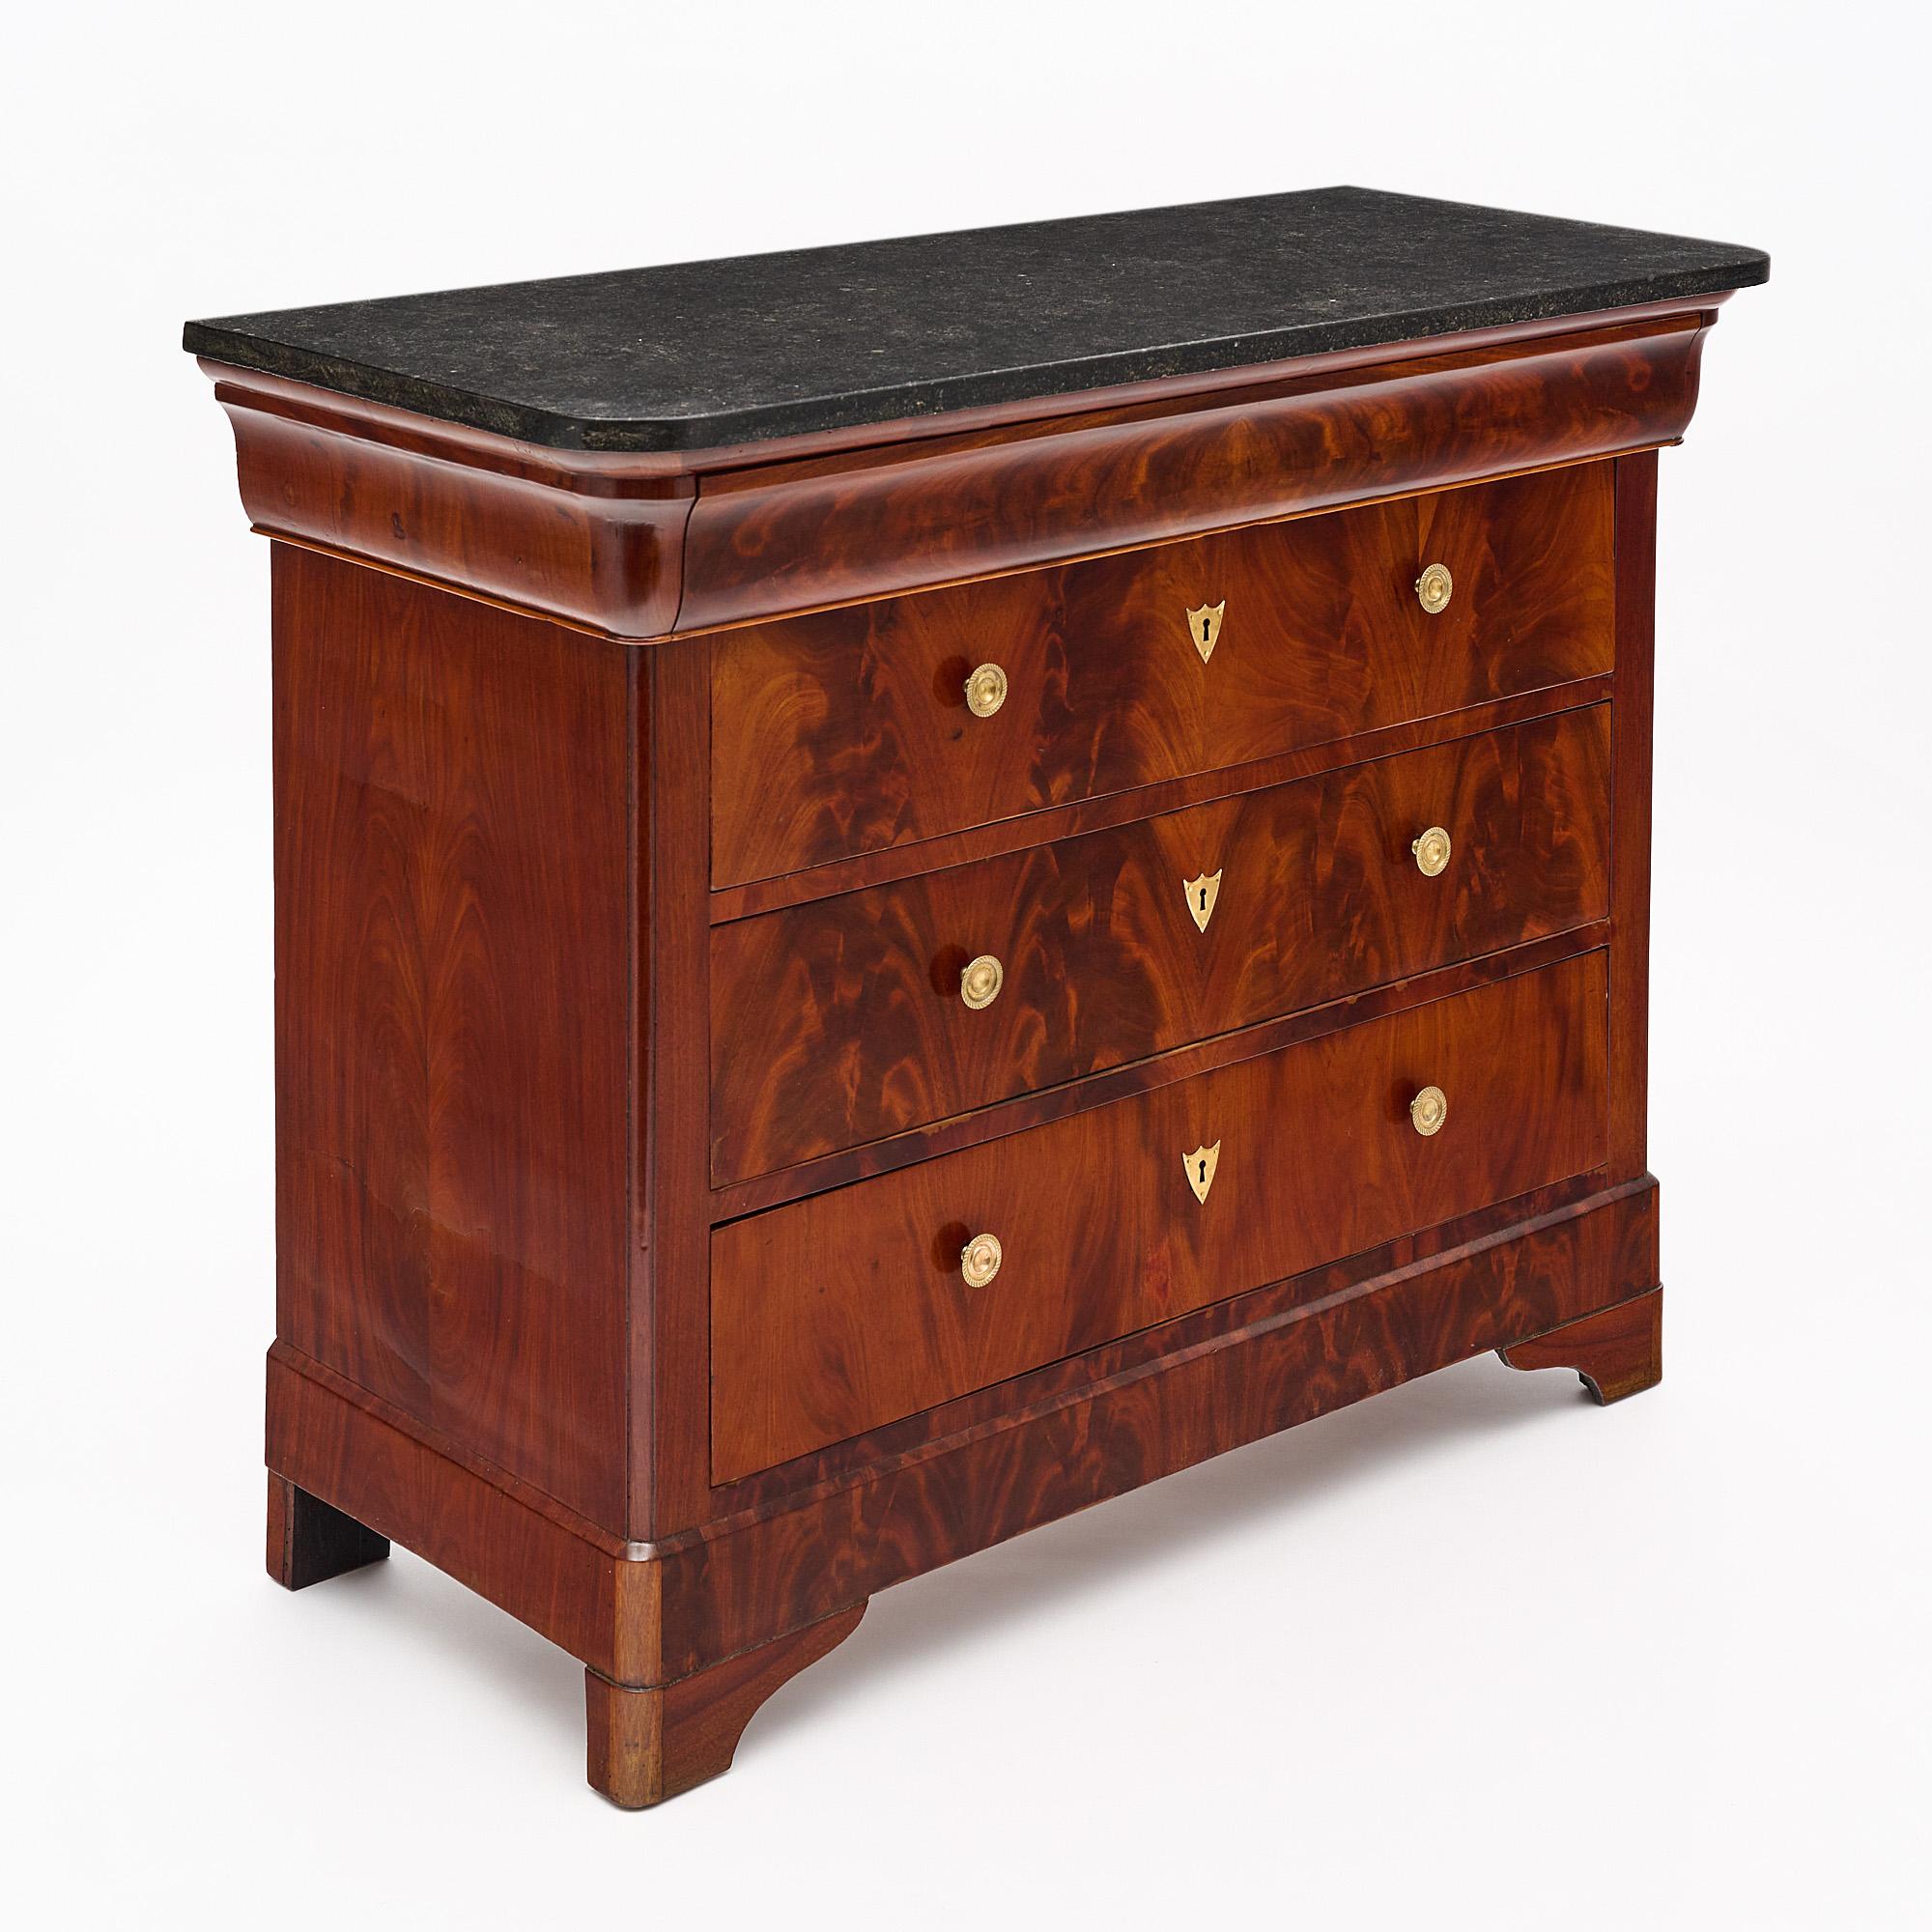 Chest of drawers, French, made of Cuban flamed mahogany. This piece has four dovetailed drawers with bronze wax cast pulls. The commode features an intact black marble slab top.